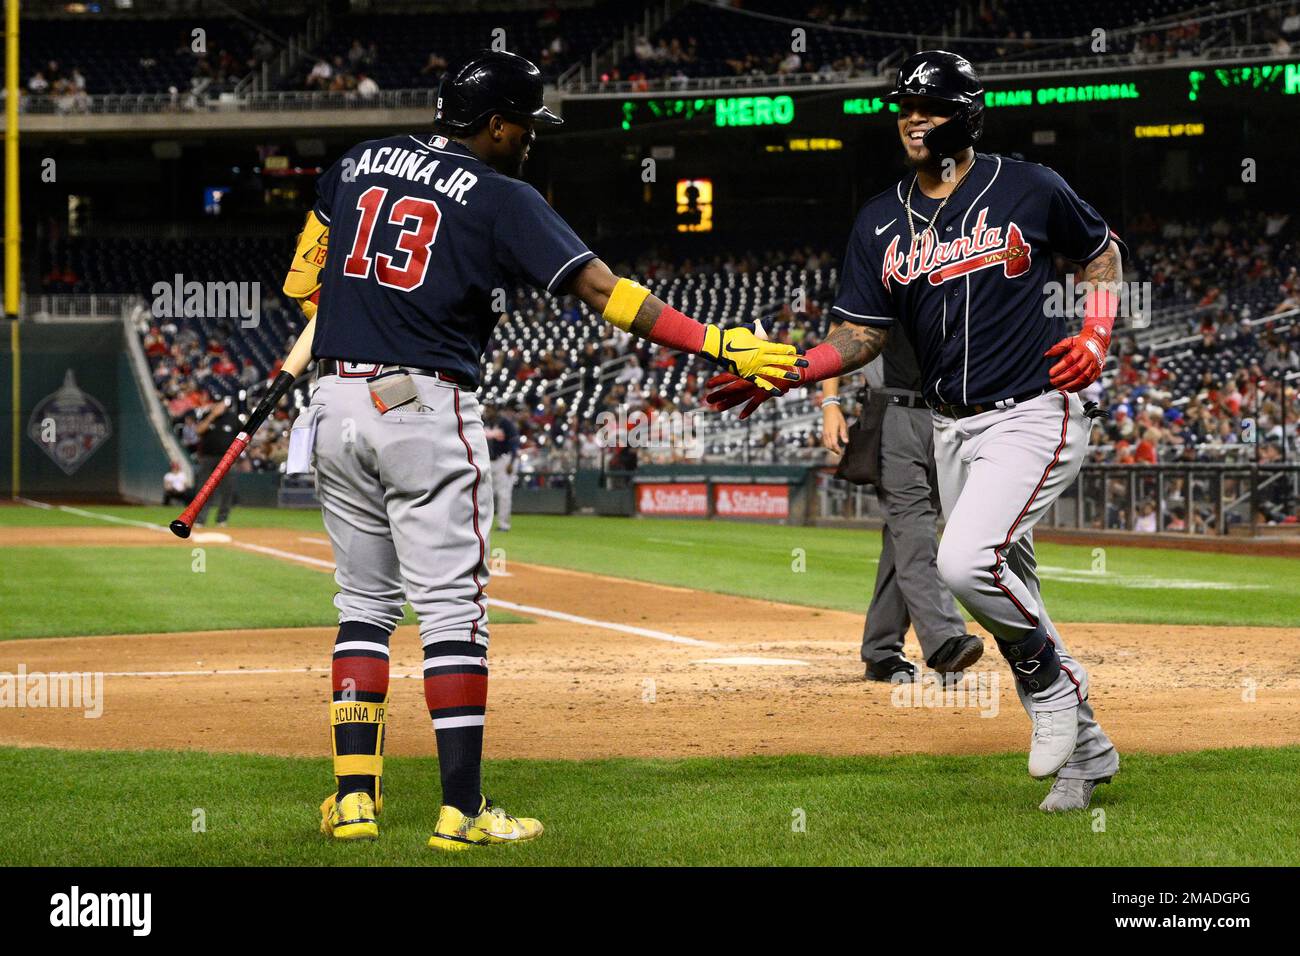 Atlanta Braves' Orlando Arcia, right, celebrates with Ronald Acuna Jr.  (13)after hitting a two-run home run during the sixth inning of a baseball  game against the Washington Nationals, Monday, Sept. 26, 2022